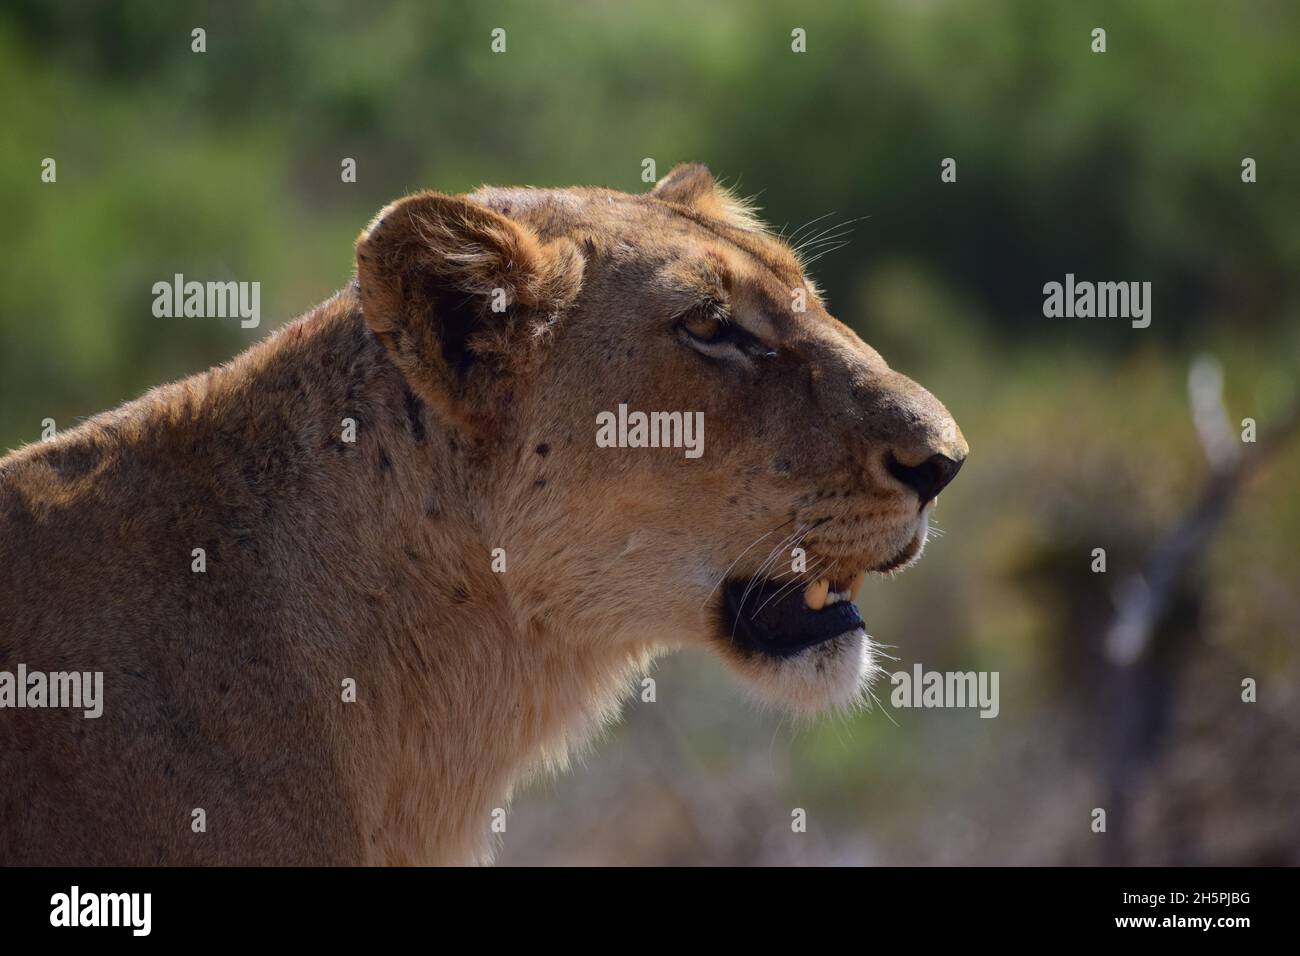 Lioness close up Stock Photo